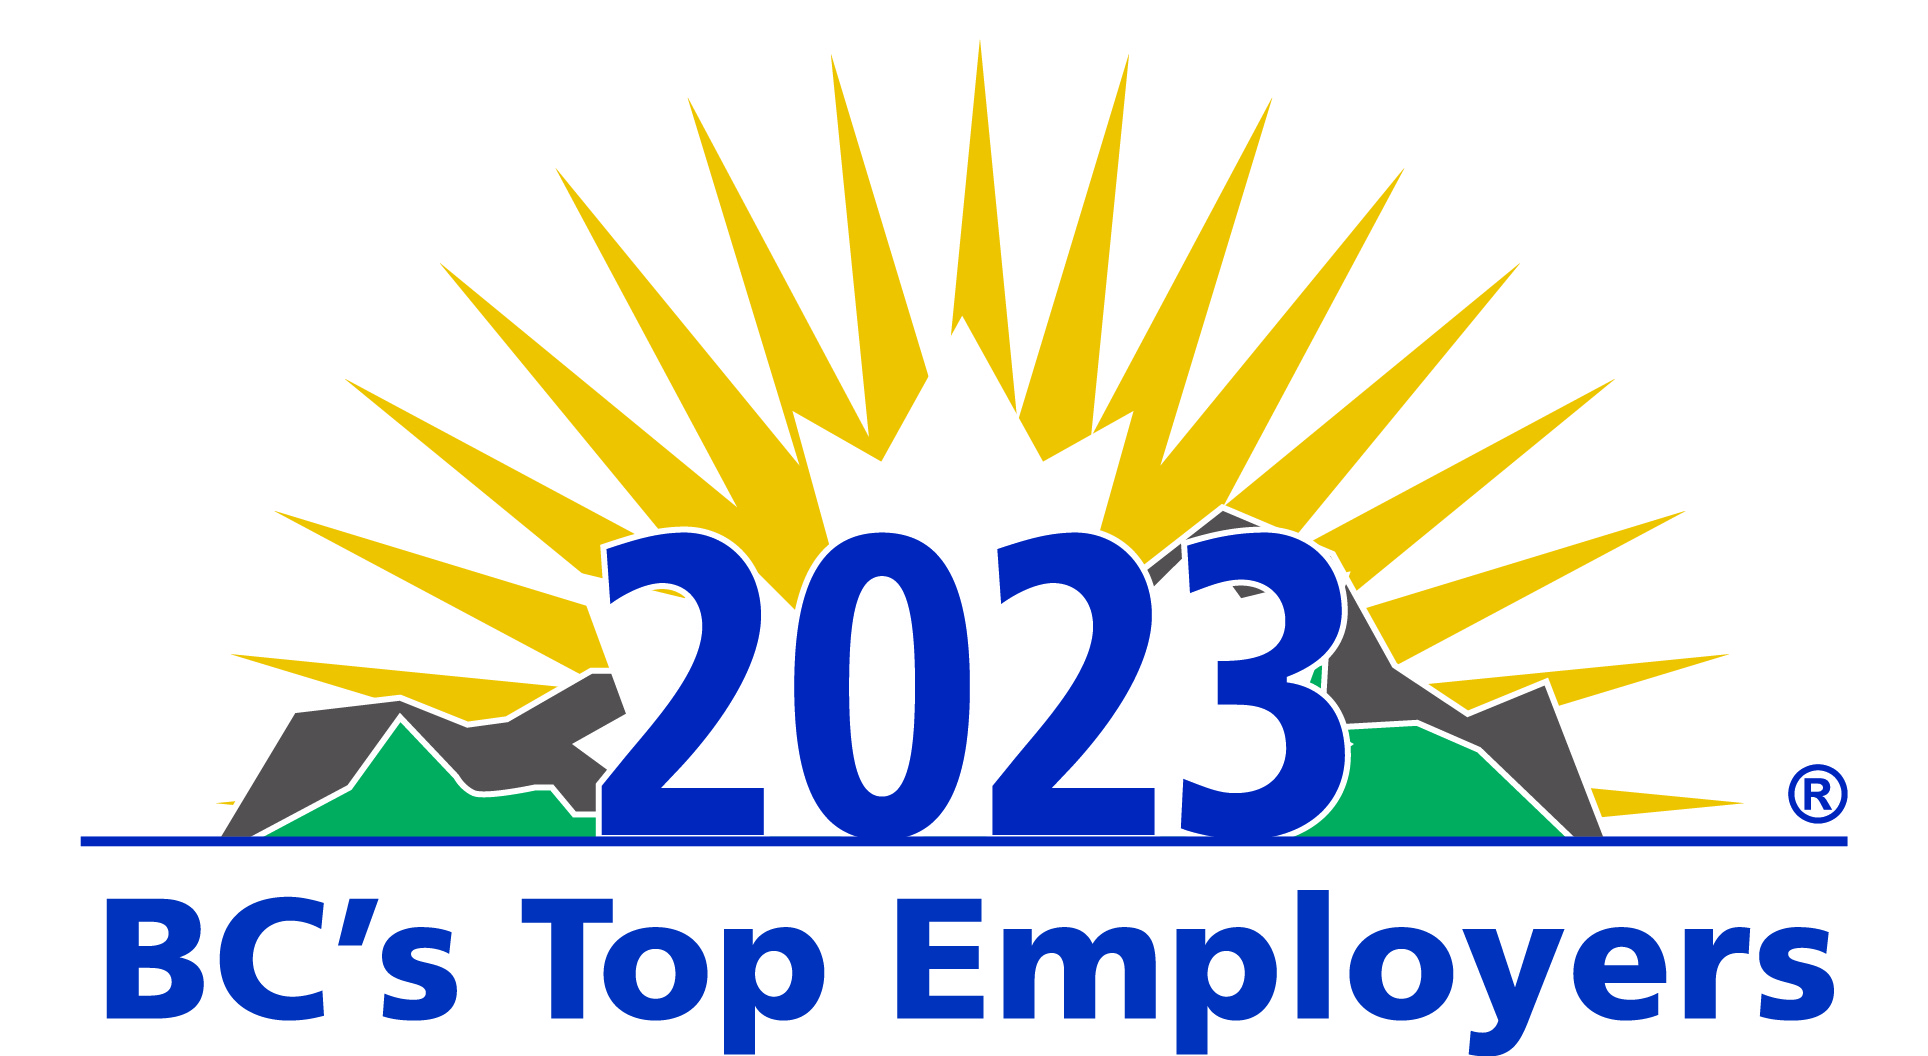 2023 BC's Top Employers